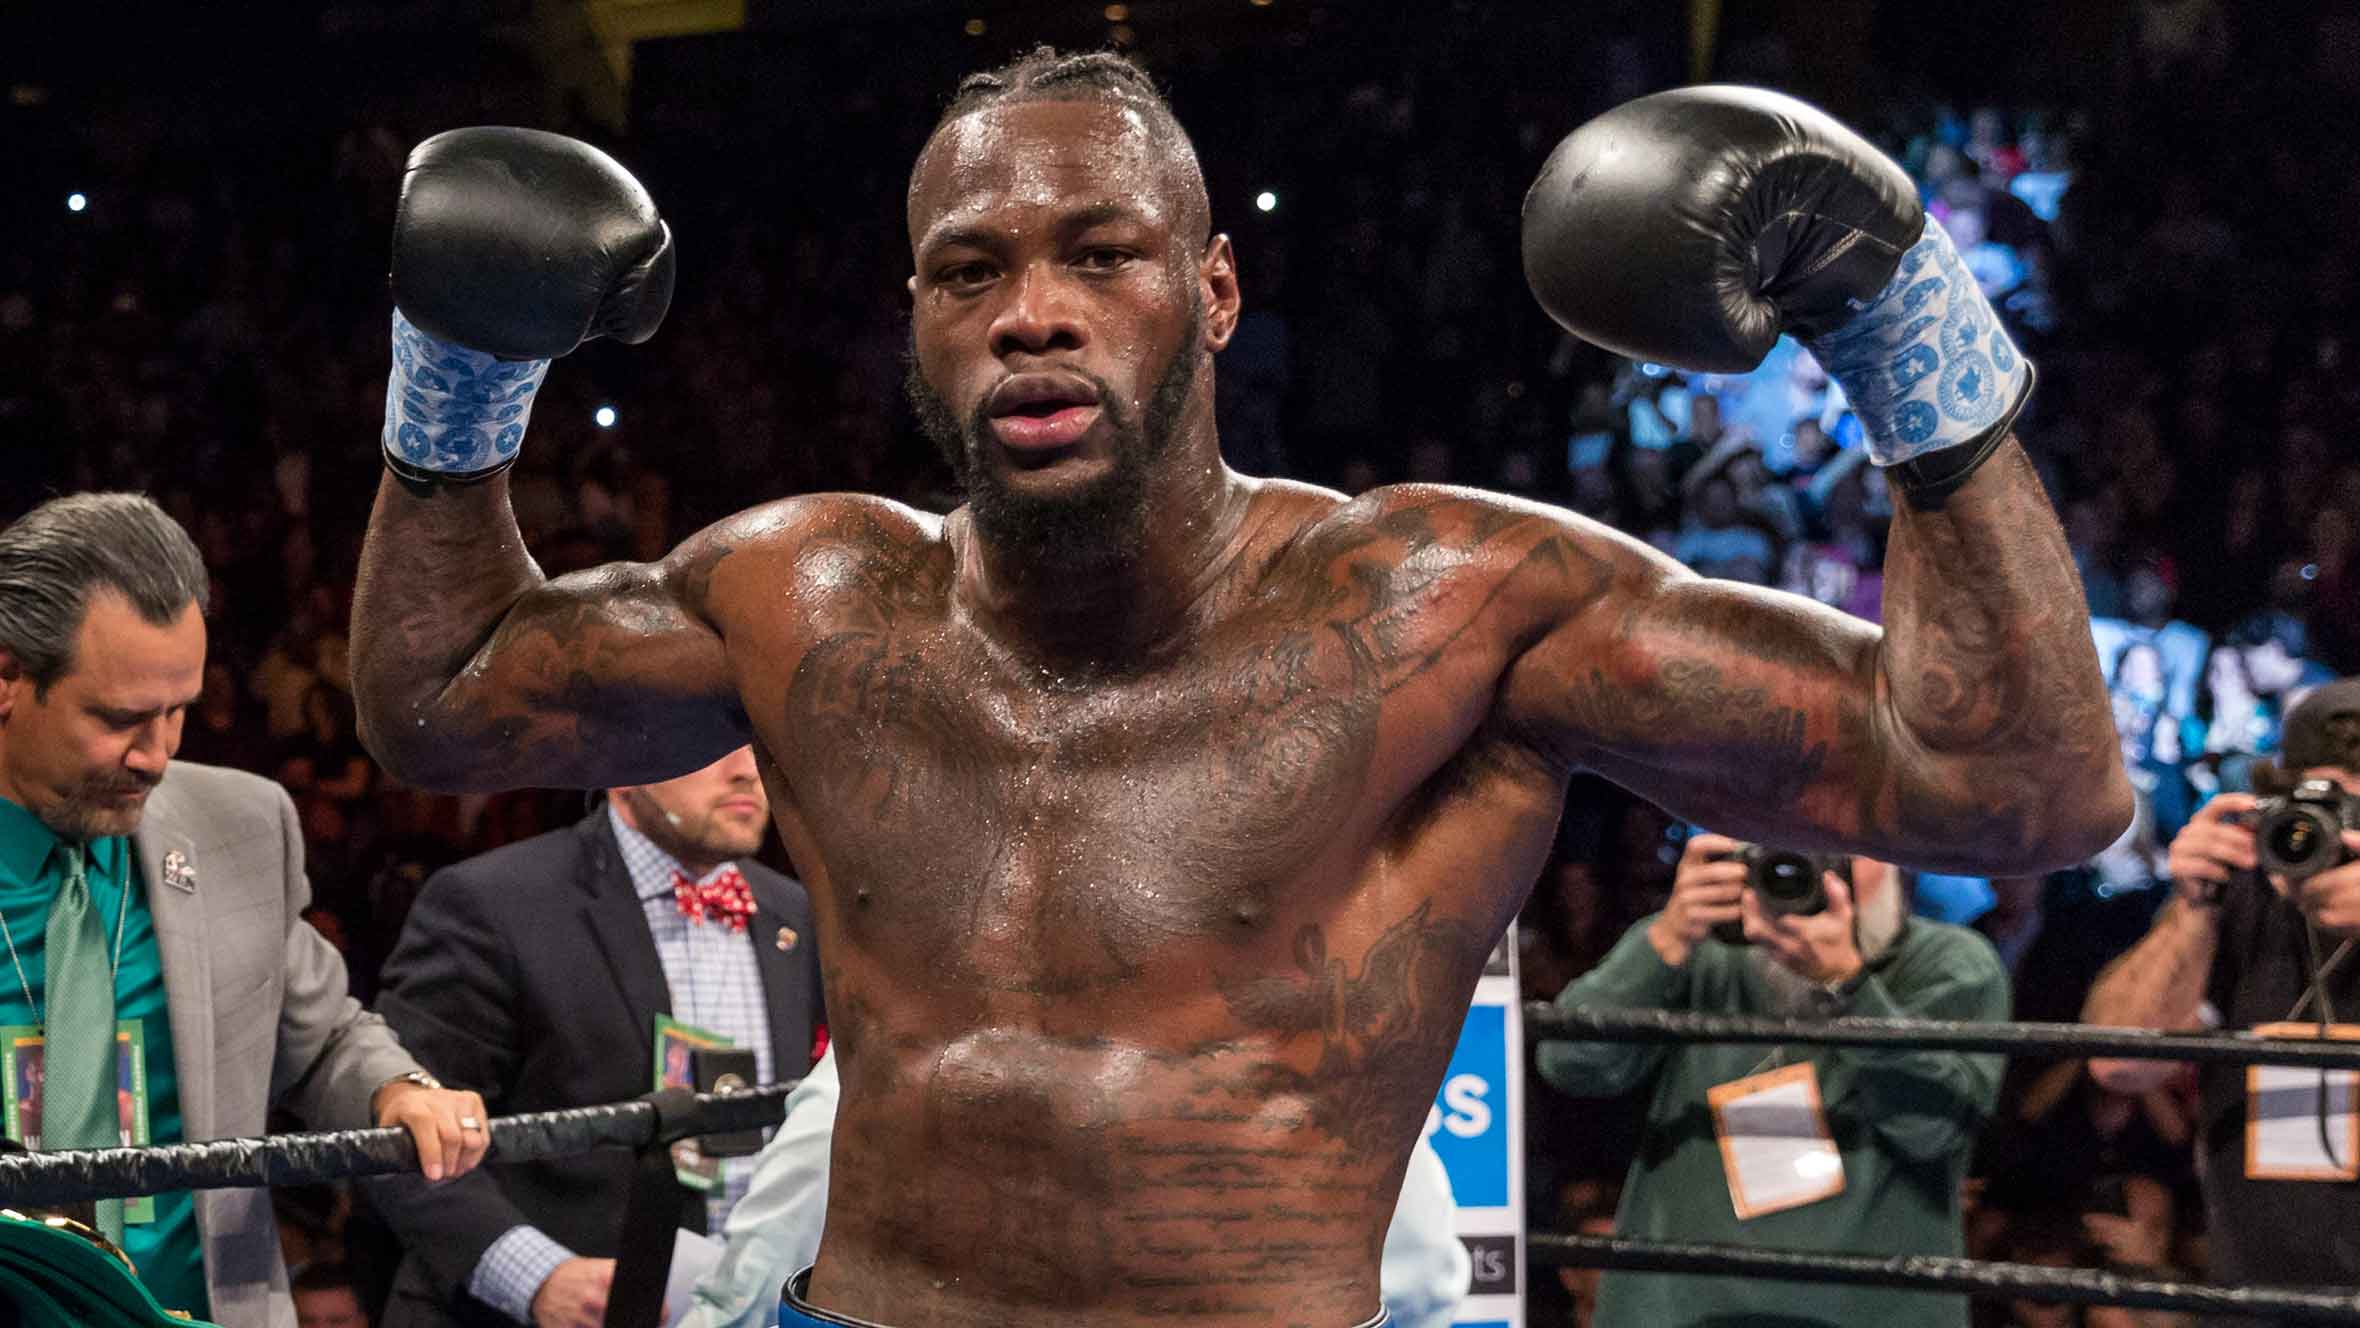 Deontay Wilder net worth - Deontay posing after a match